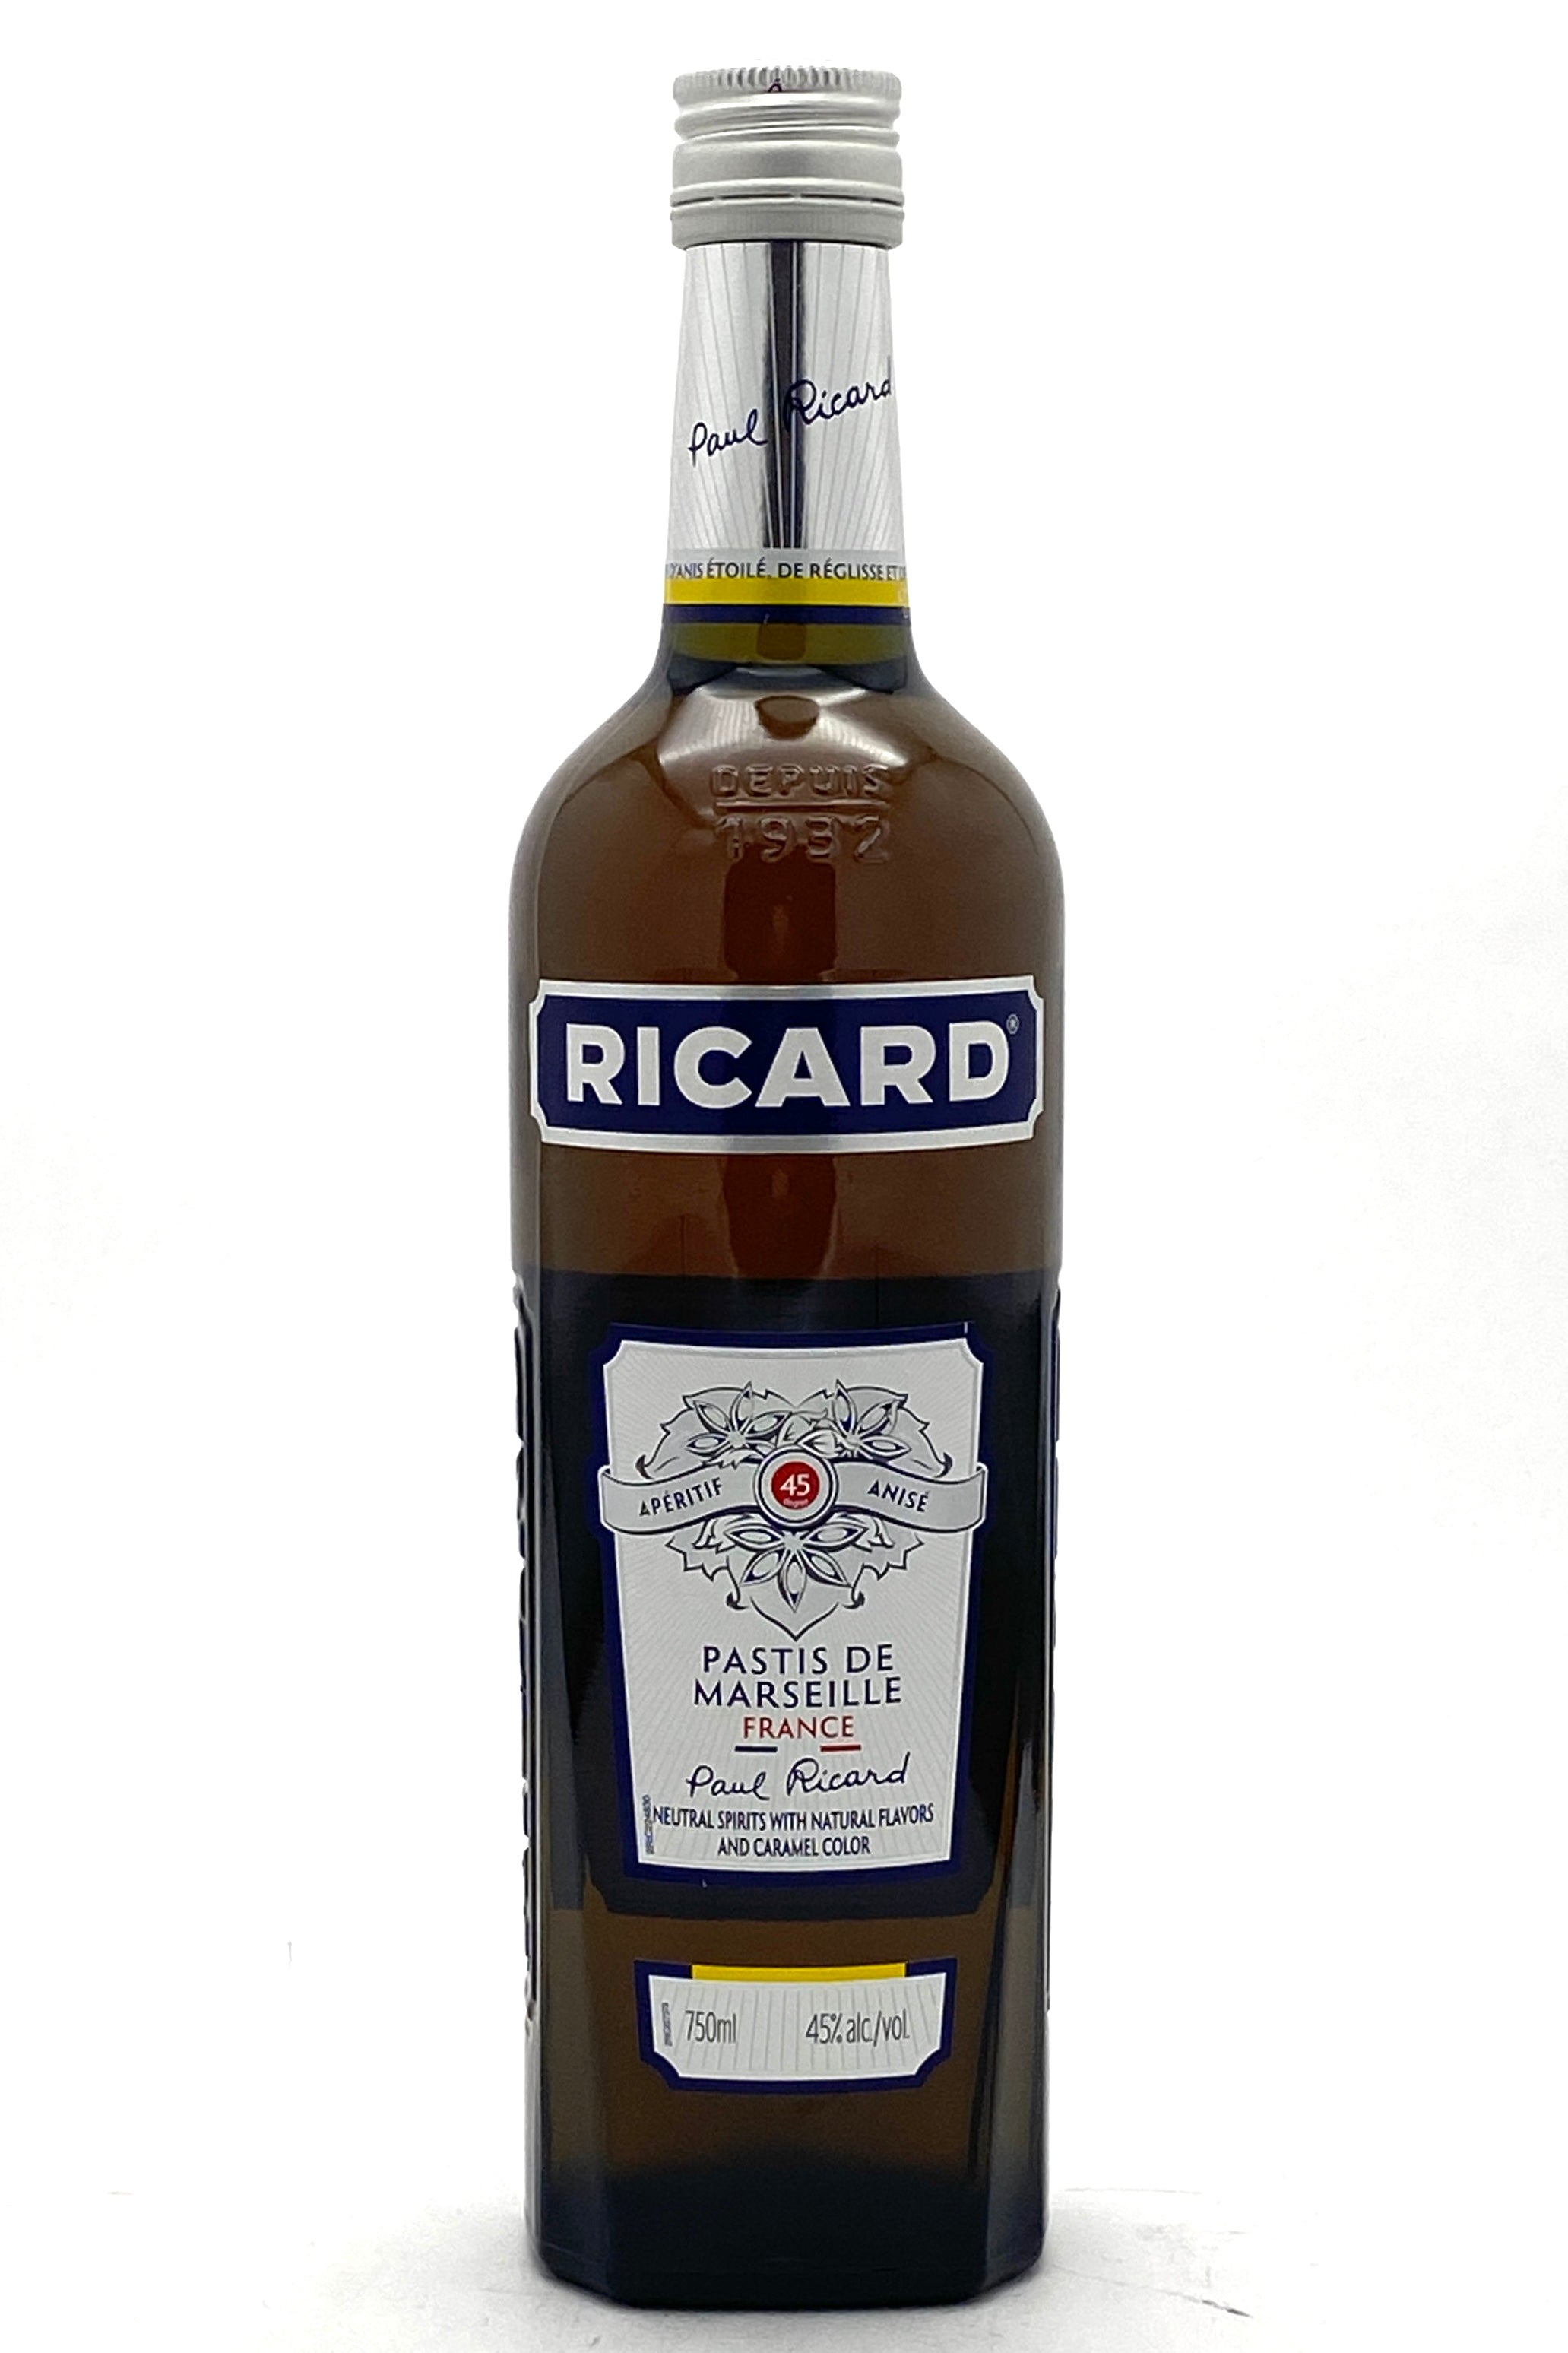 Hennessy v.s nba Limited Edition - Ricard Wine And Spirits